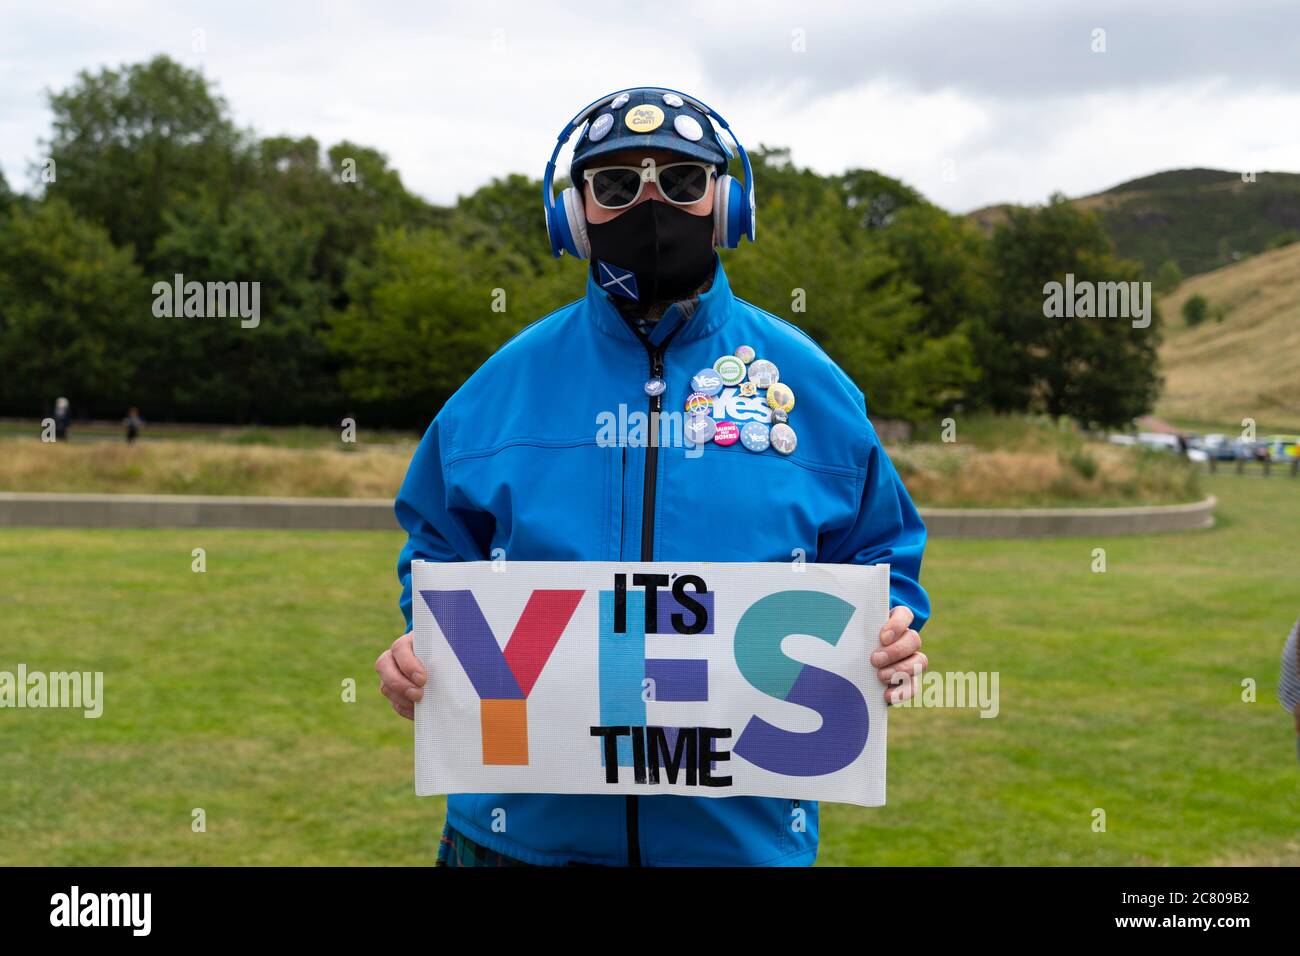 Edinburgh, Scotland, UK. 20 July, 2020. Pro Scottish independence demonstration organised by the All Under One Banner  (AUOB) group outside the Scottish Parliament at Holyrood in Edinburgh today.  Iain Masterton/Alamy Live News Stock Photo